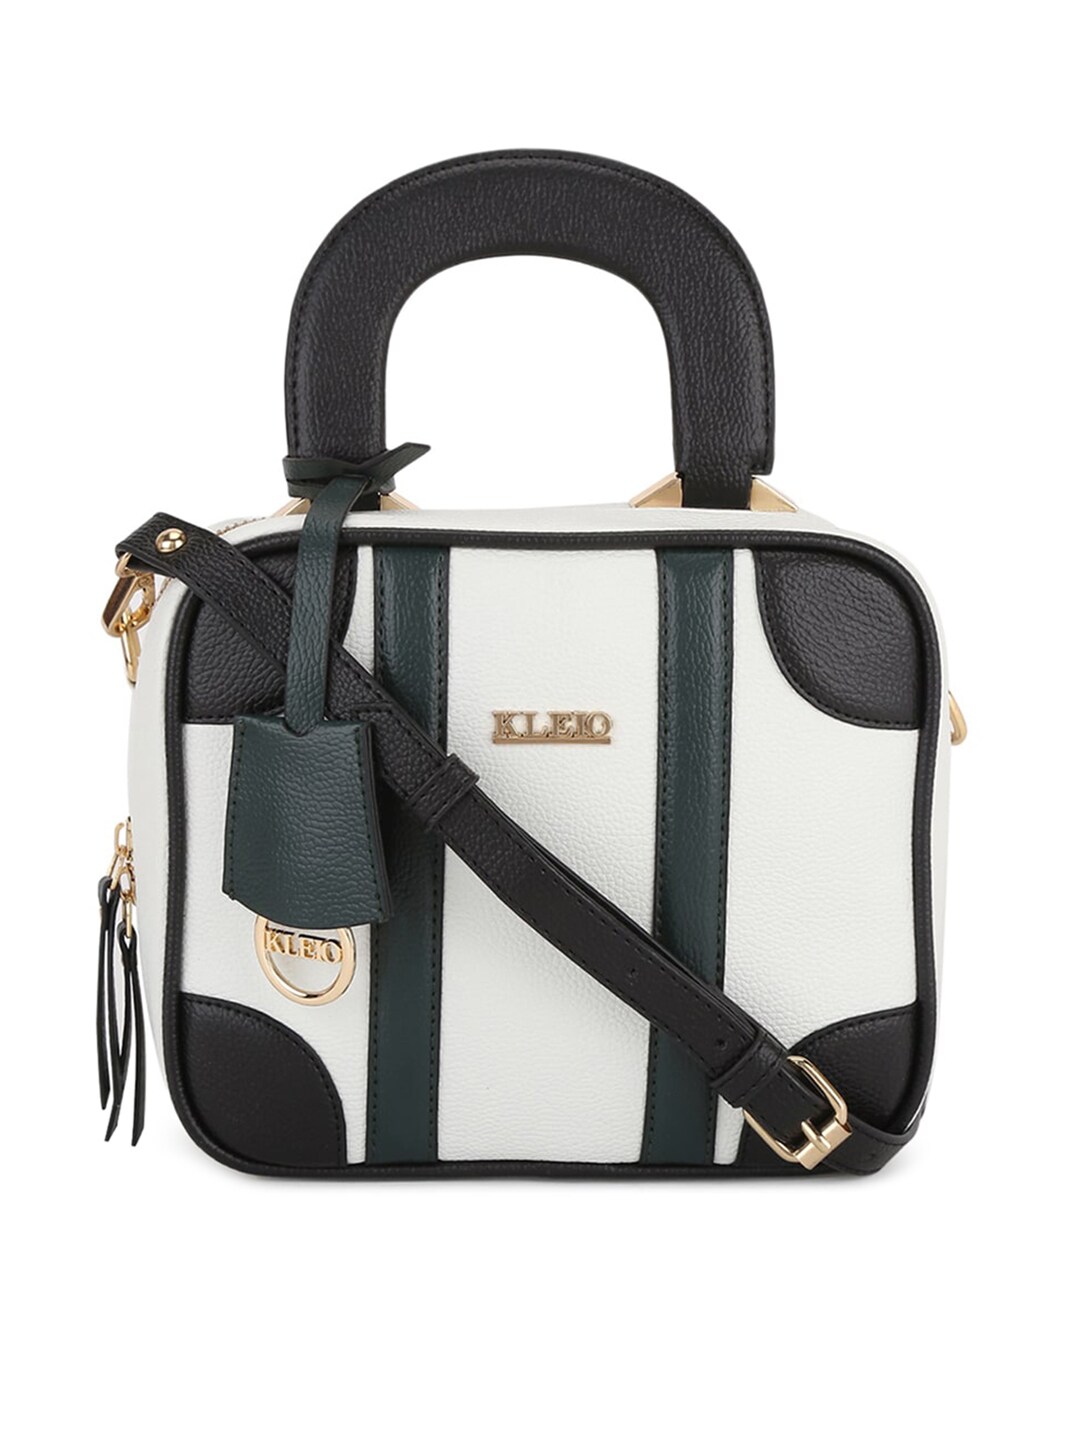 KLEIO White Colourblocked PU Swagger Handheld Bag with Applique Price in India